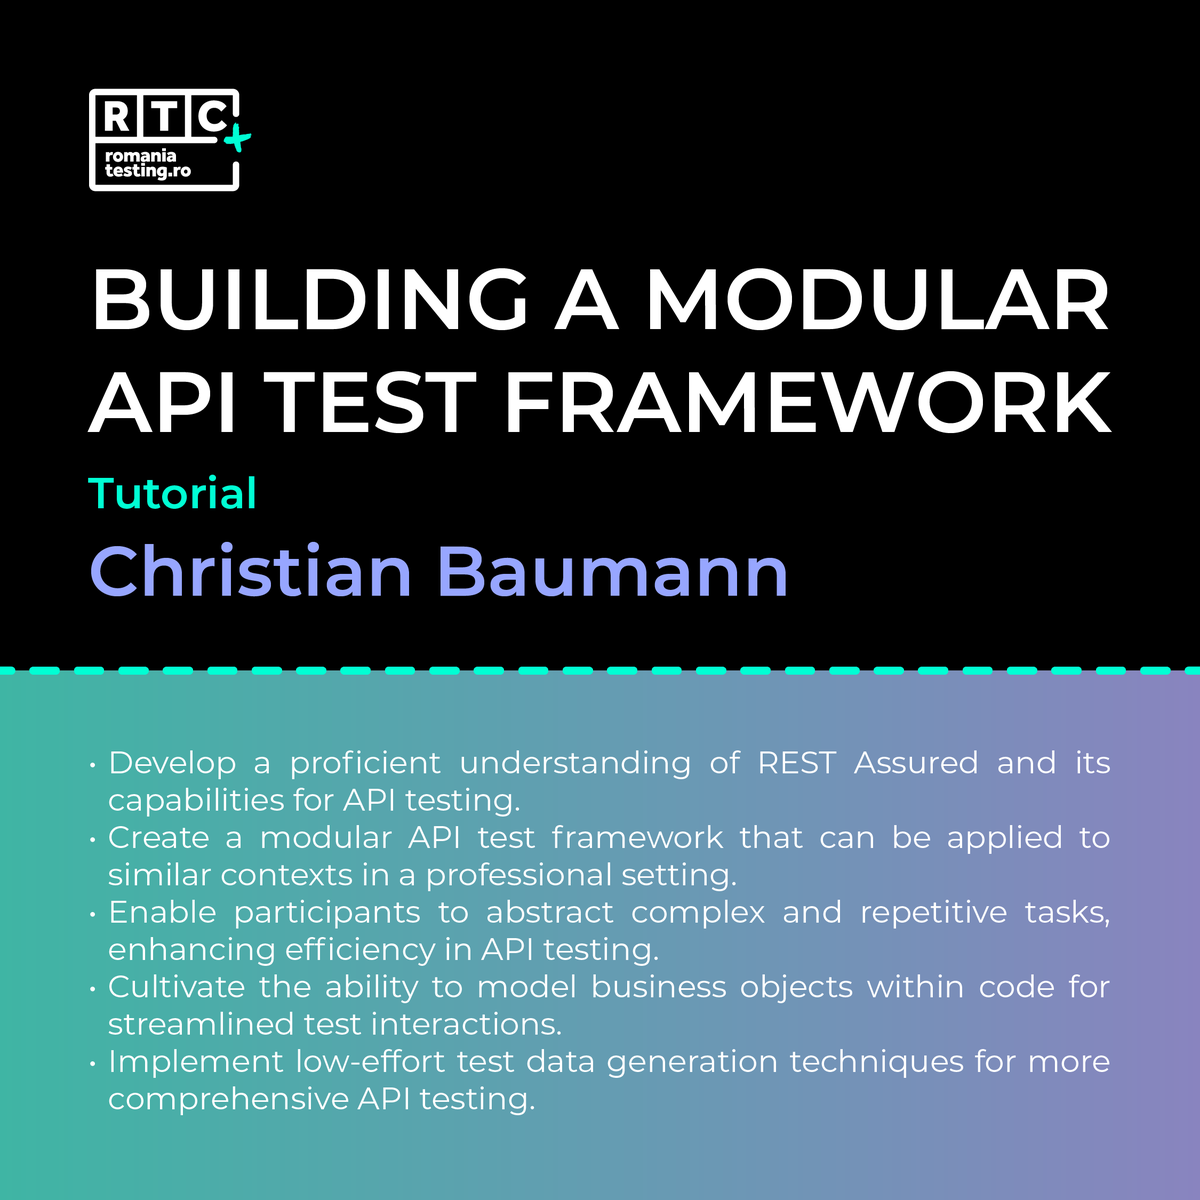 Need to up your API testing game? Join @chrissbaumann's dojo! 🧙‍♂️ 🧠 Get savvy with #REST Assured and unleash the power of programmatic #API testing. With Christian's expertise, you'll craft a #framework that turns complexity into simplicity. #APITesting #TechWorkshop #CodeCraft